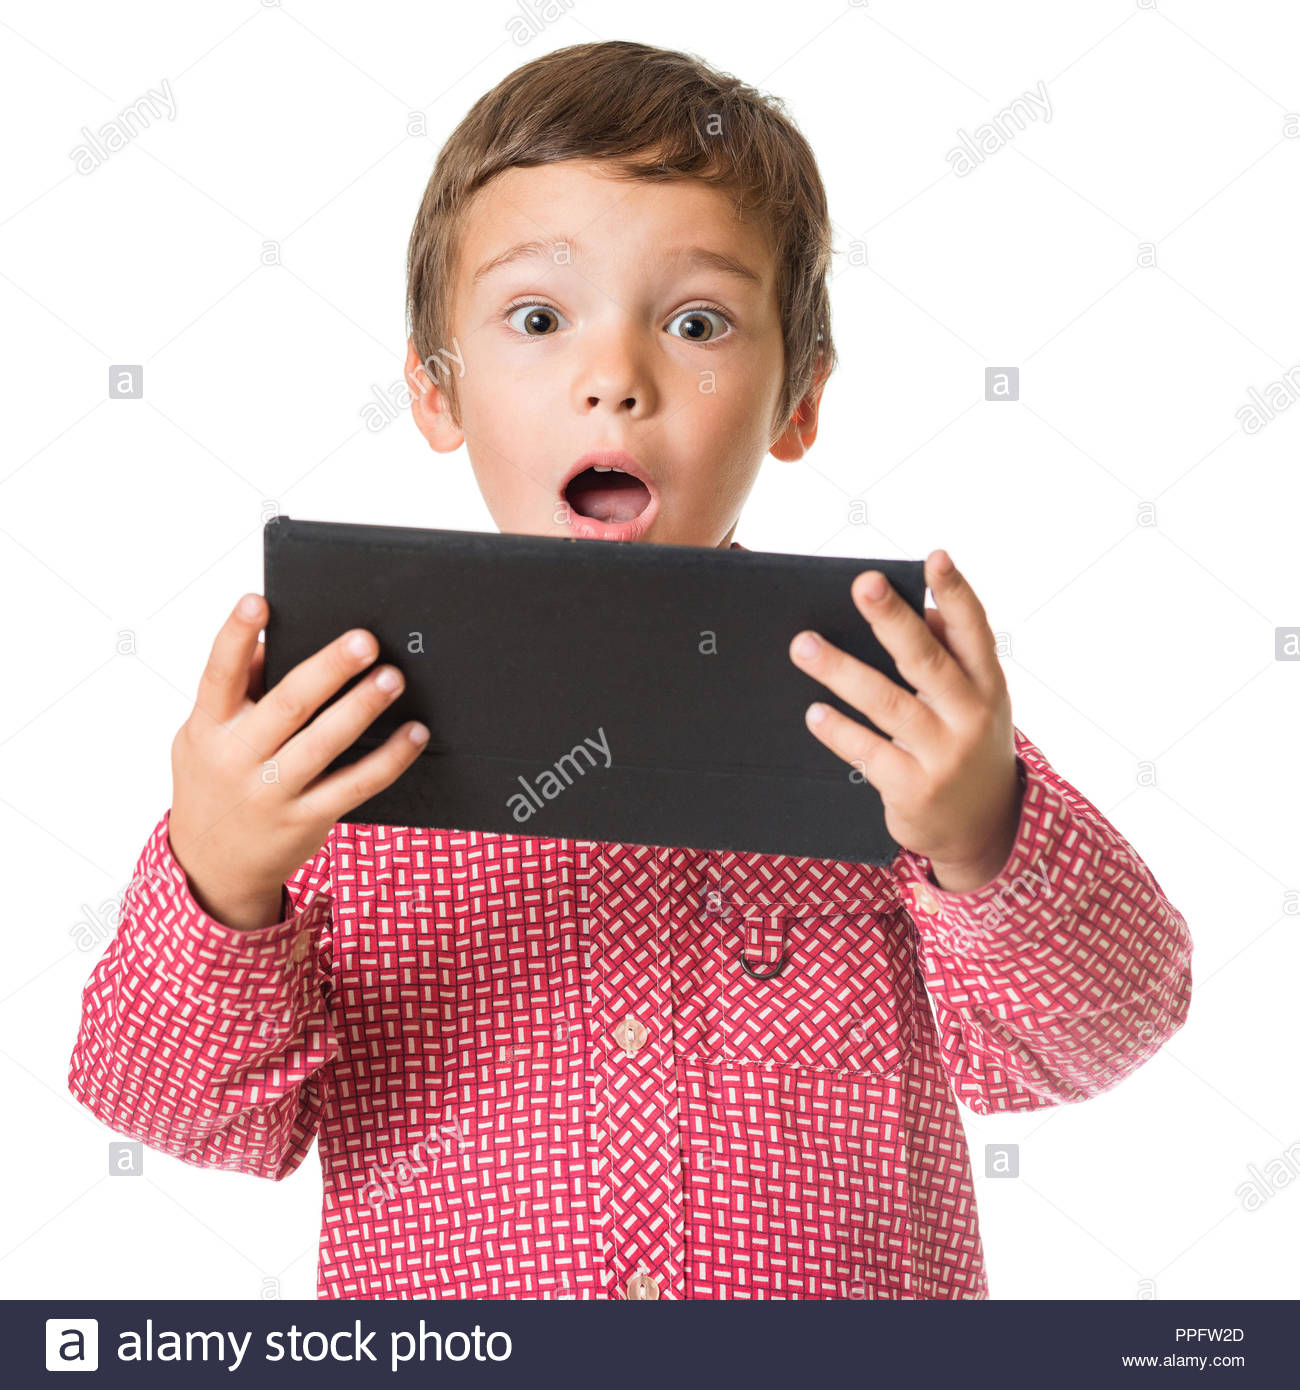 Young Surprised Boy Holding Tablet Isolated On White Background